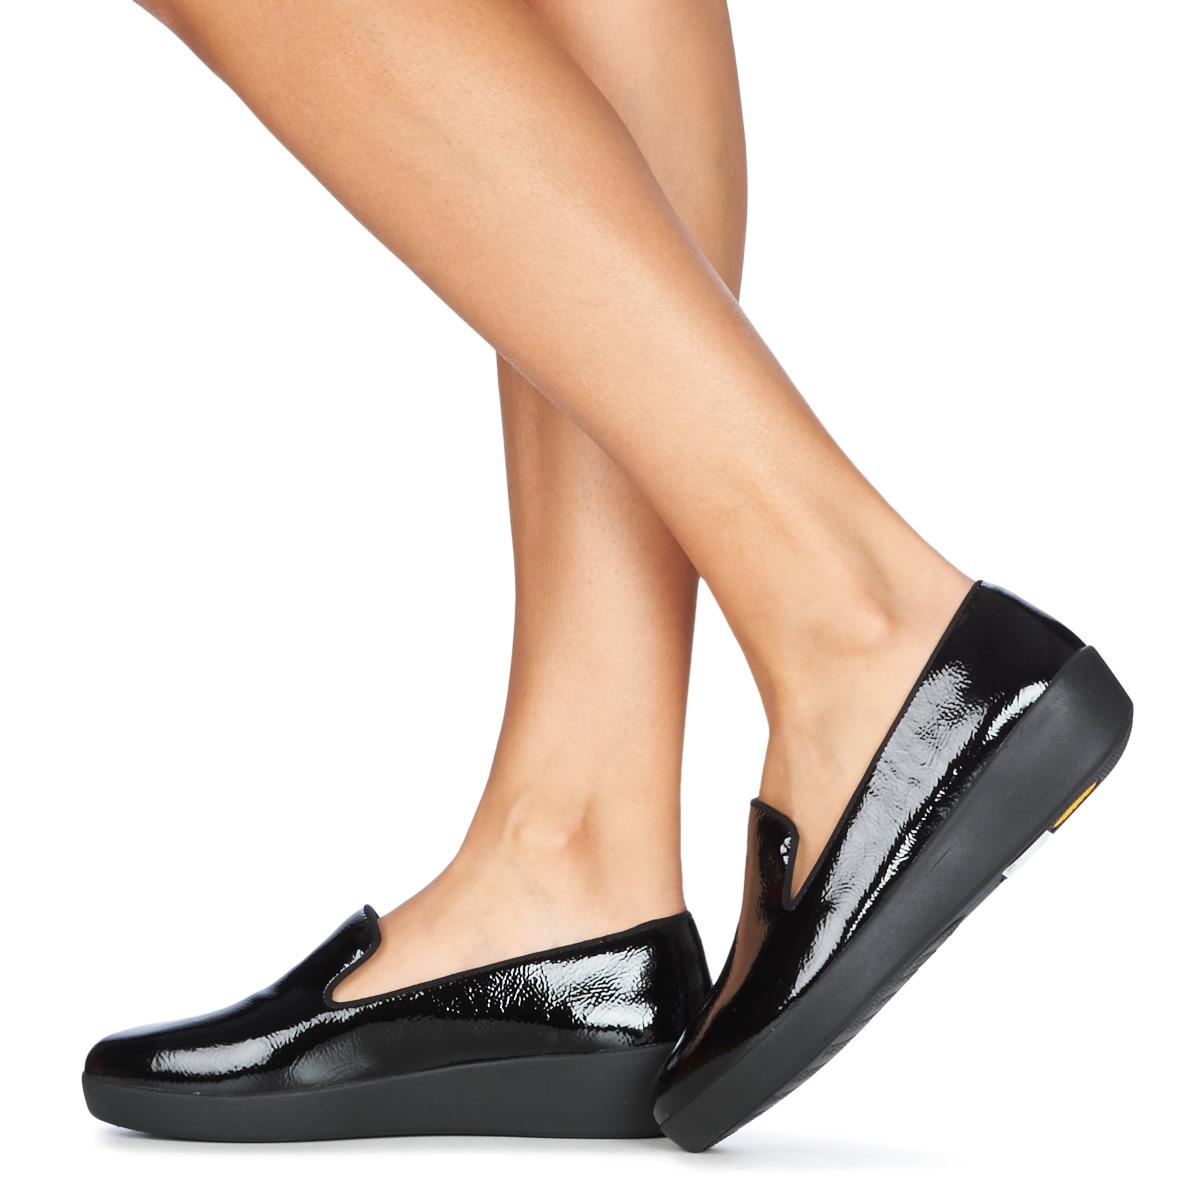 Fitflop Audrey Smoking Slippers Crinkle 